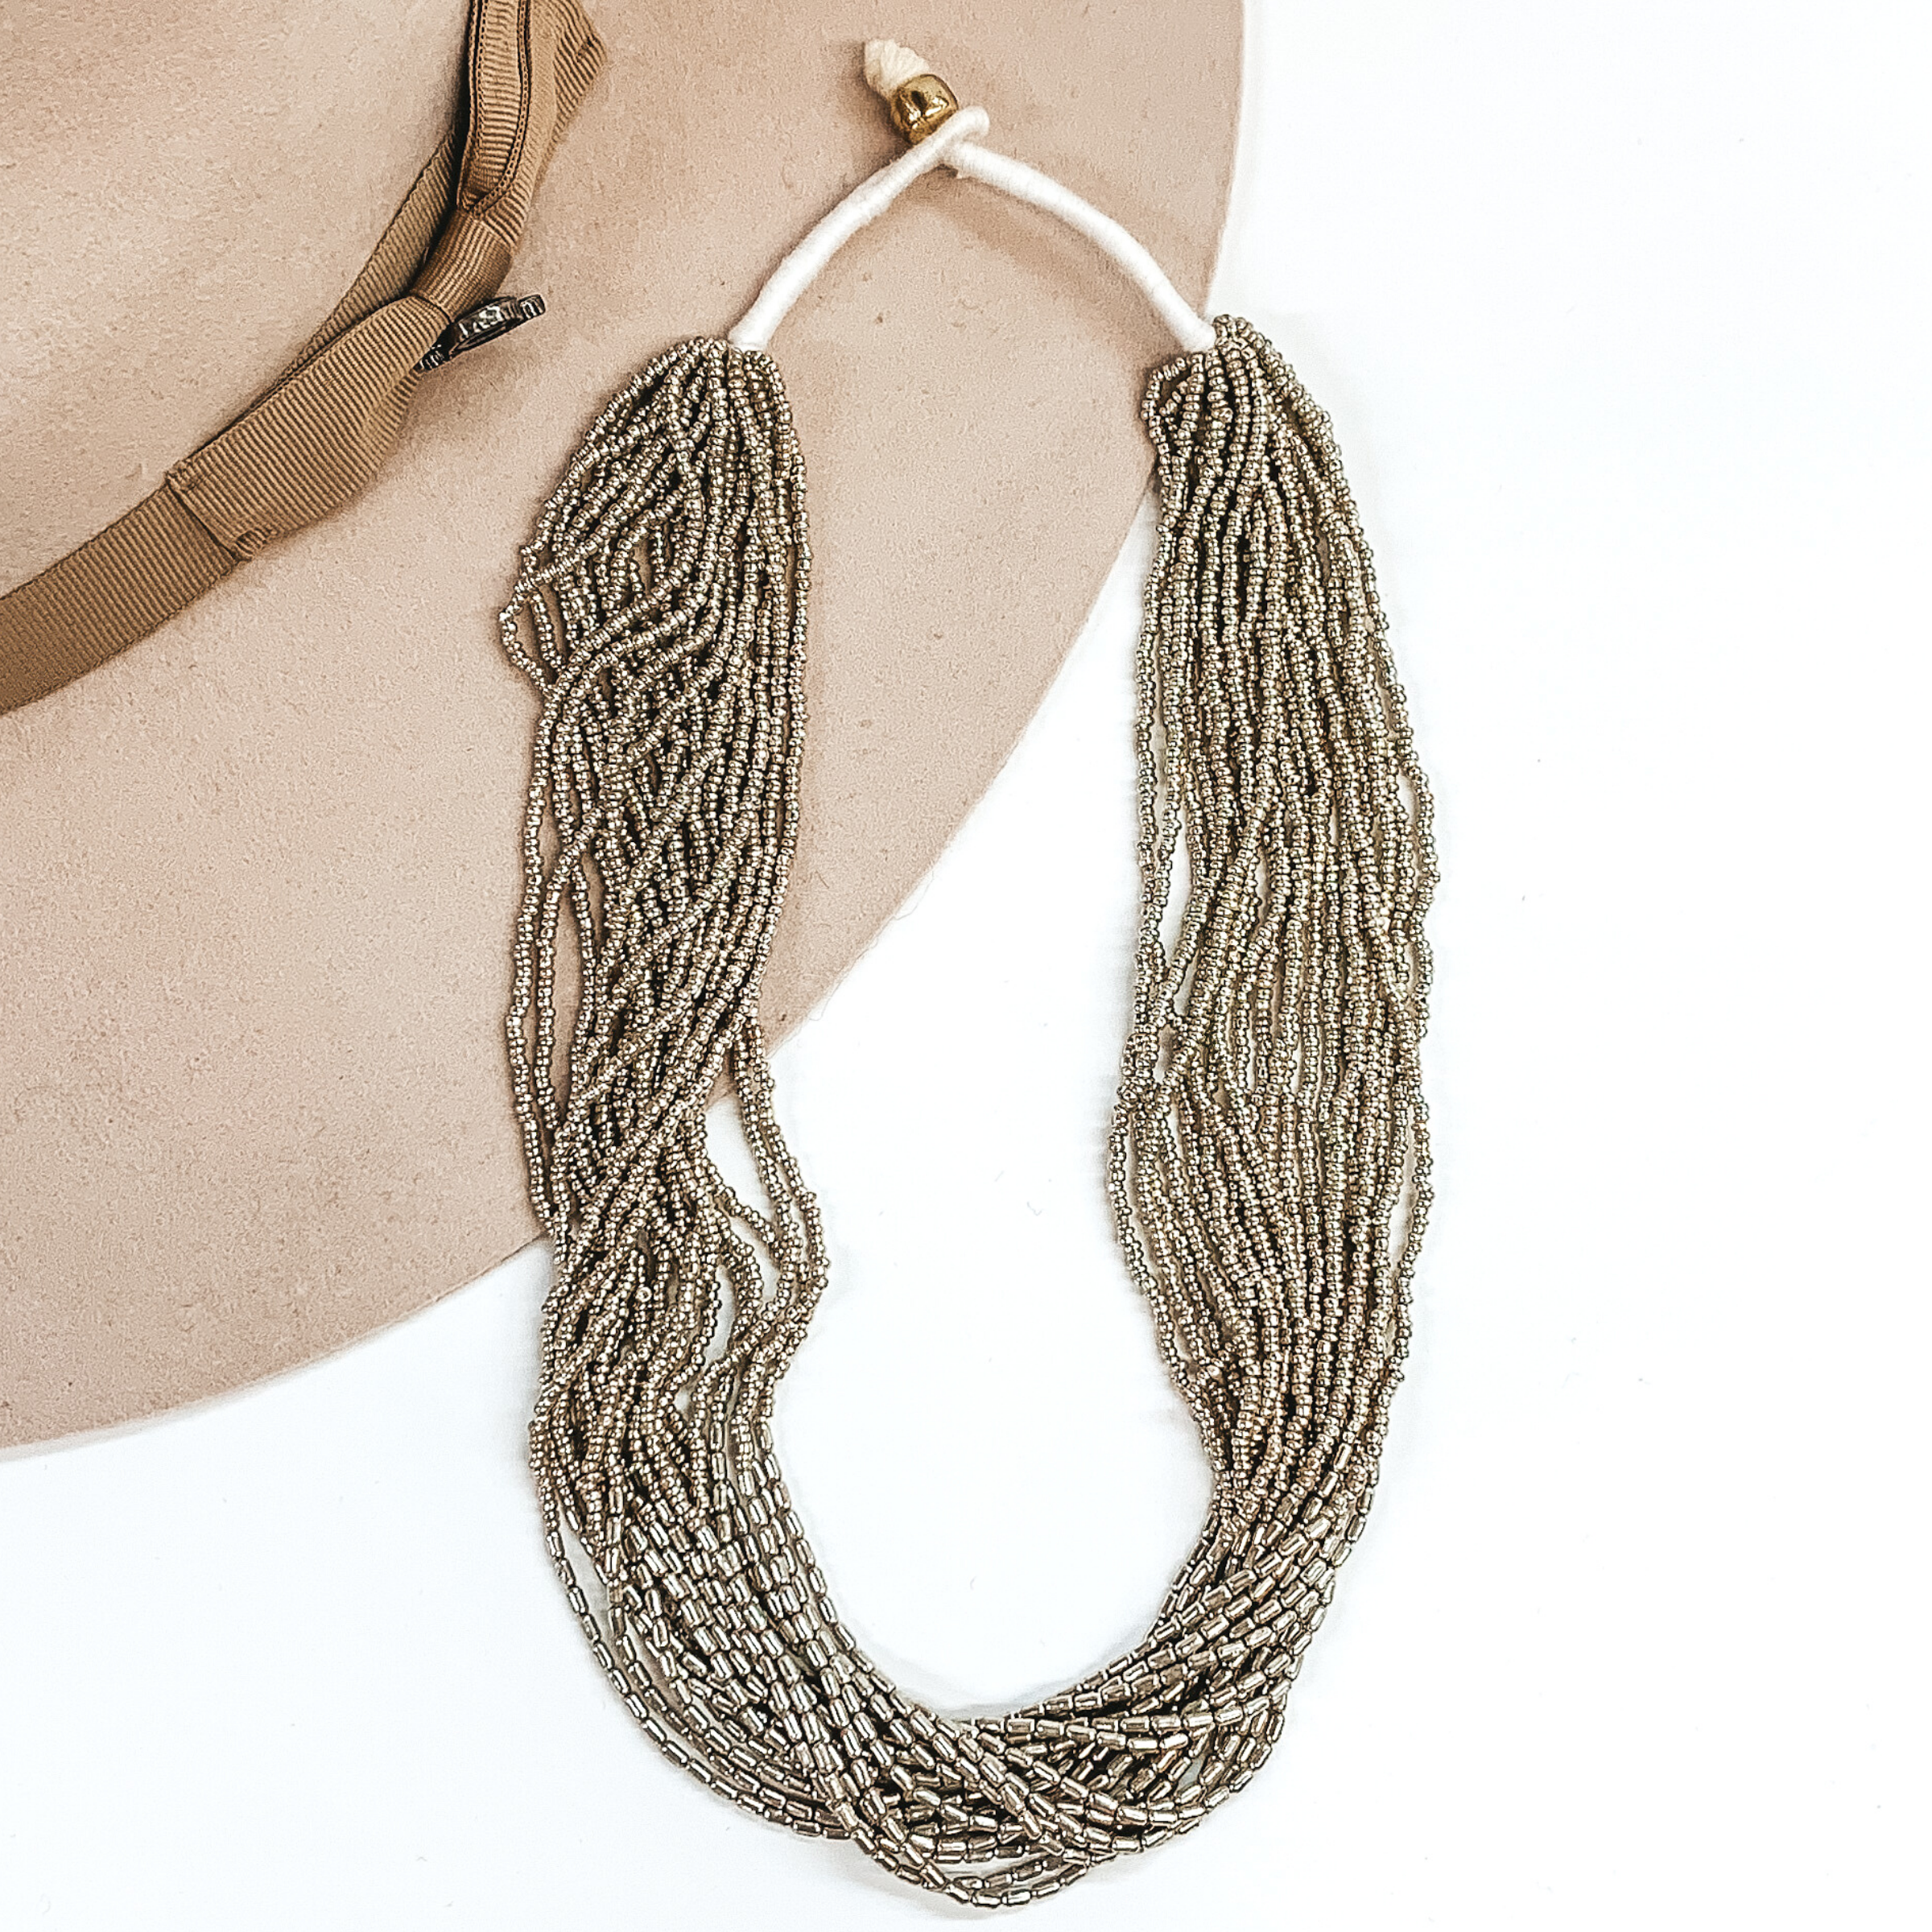 The strands on this necklace have silver beads and silver beads in the middle of the string. There are a lot of single strings put together to make a single necklace. The necklace has a gold bead that goes through a loop to put the necklace on. This necklace is pictured laying on a beige hat on a white background.